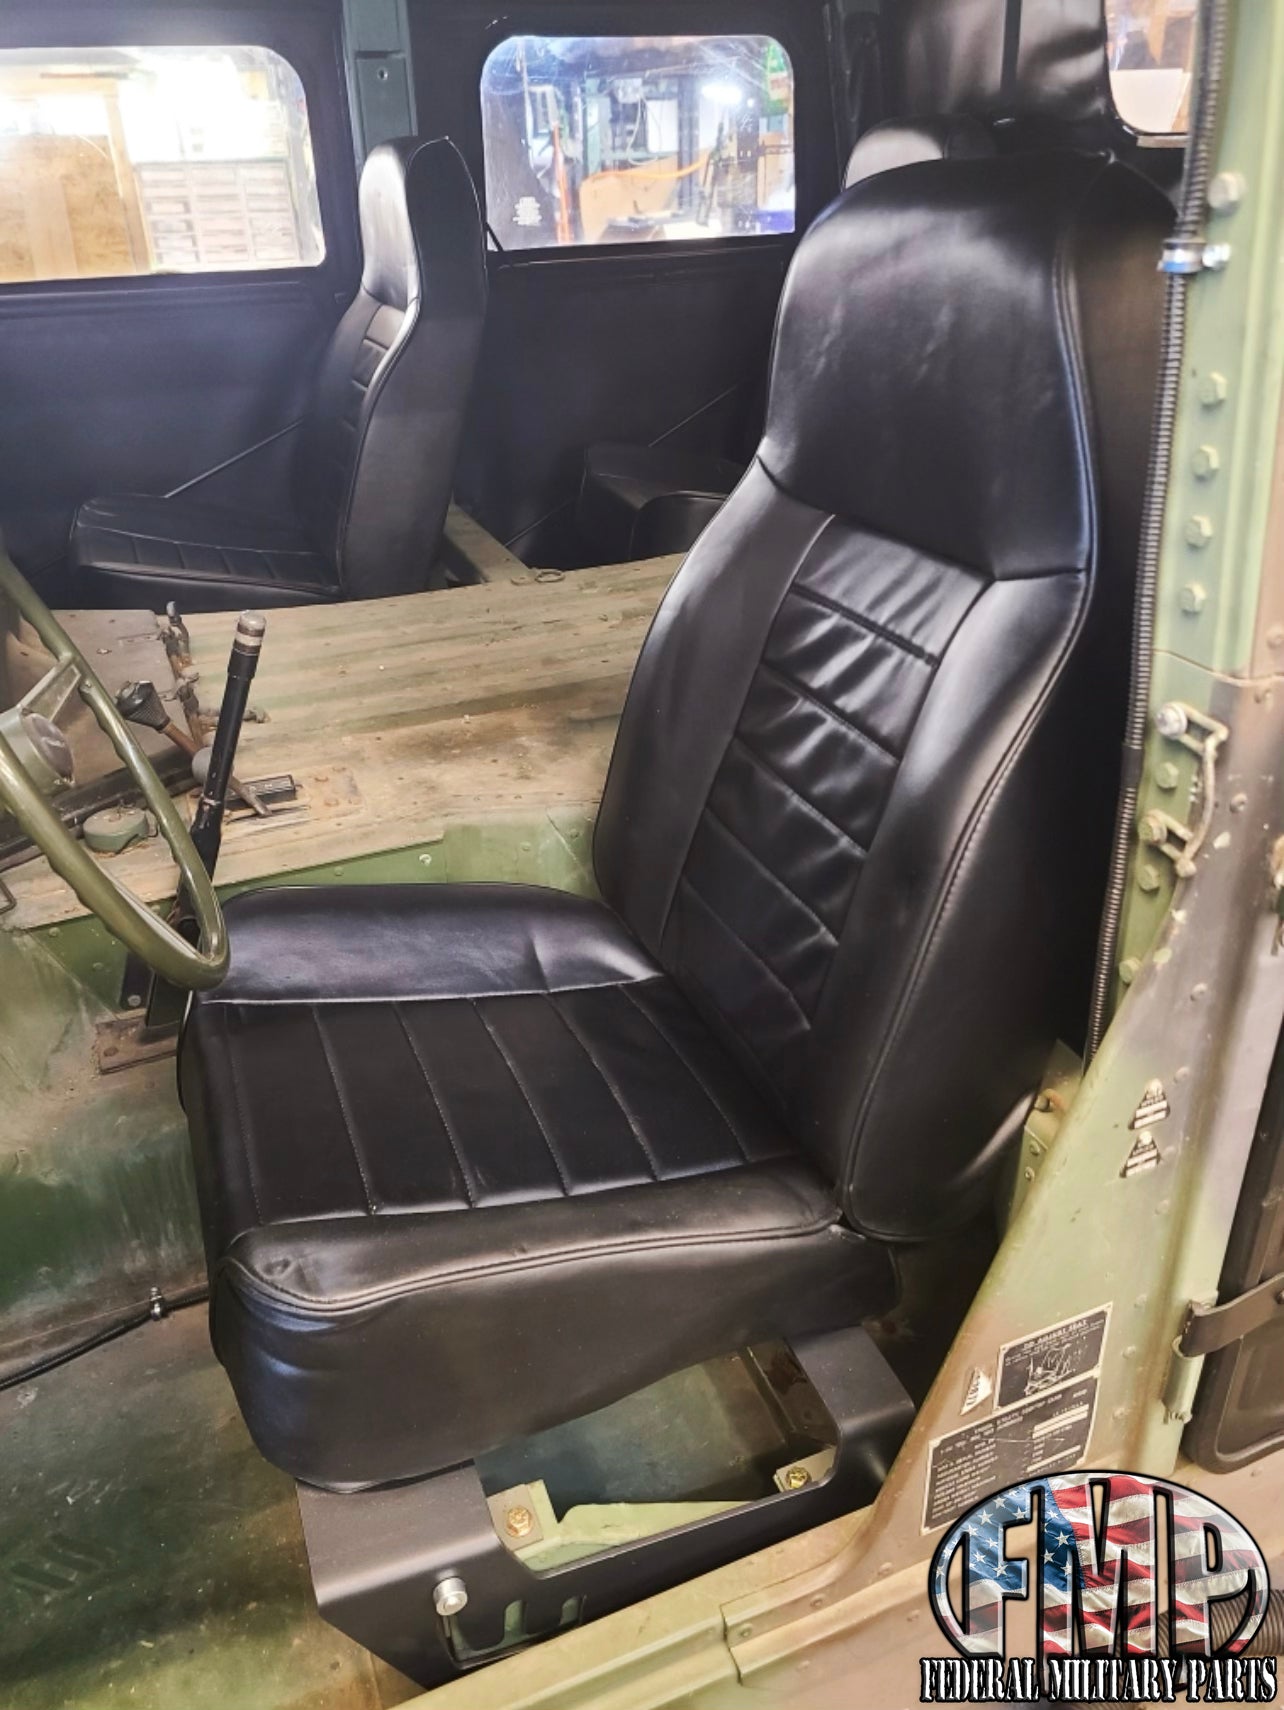 Seat Base, Driver’s Seat for Military Vehicles including Humvee